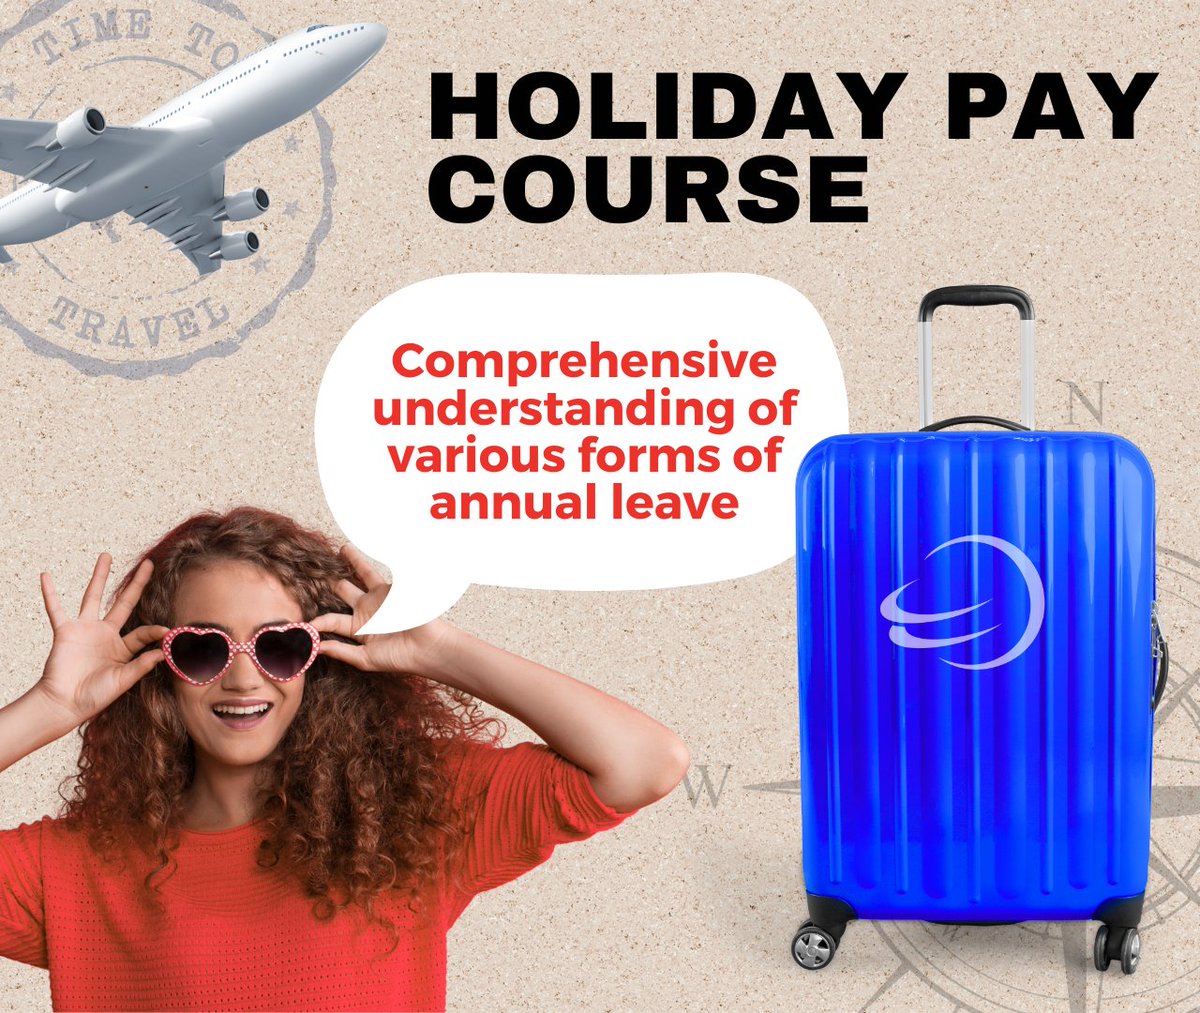 It's almost time for take-off! Sign up for the #HolidayPay Course  ✈️

Gain a comprehensive overview of the significance of influential case law and statutes, as well as the distinctions among various forms of #annualleave  💡

Register your place here: bit.ly/4cKgzcM